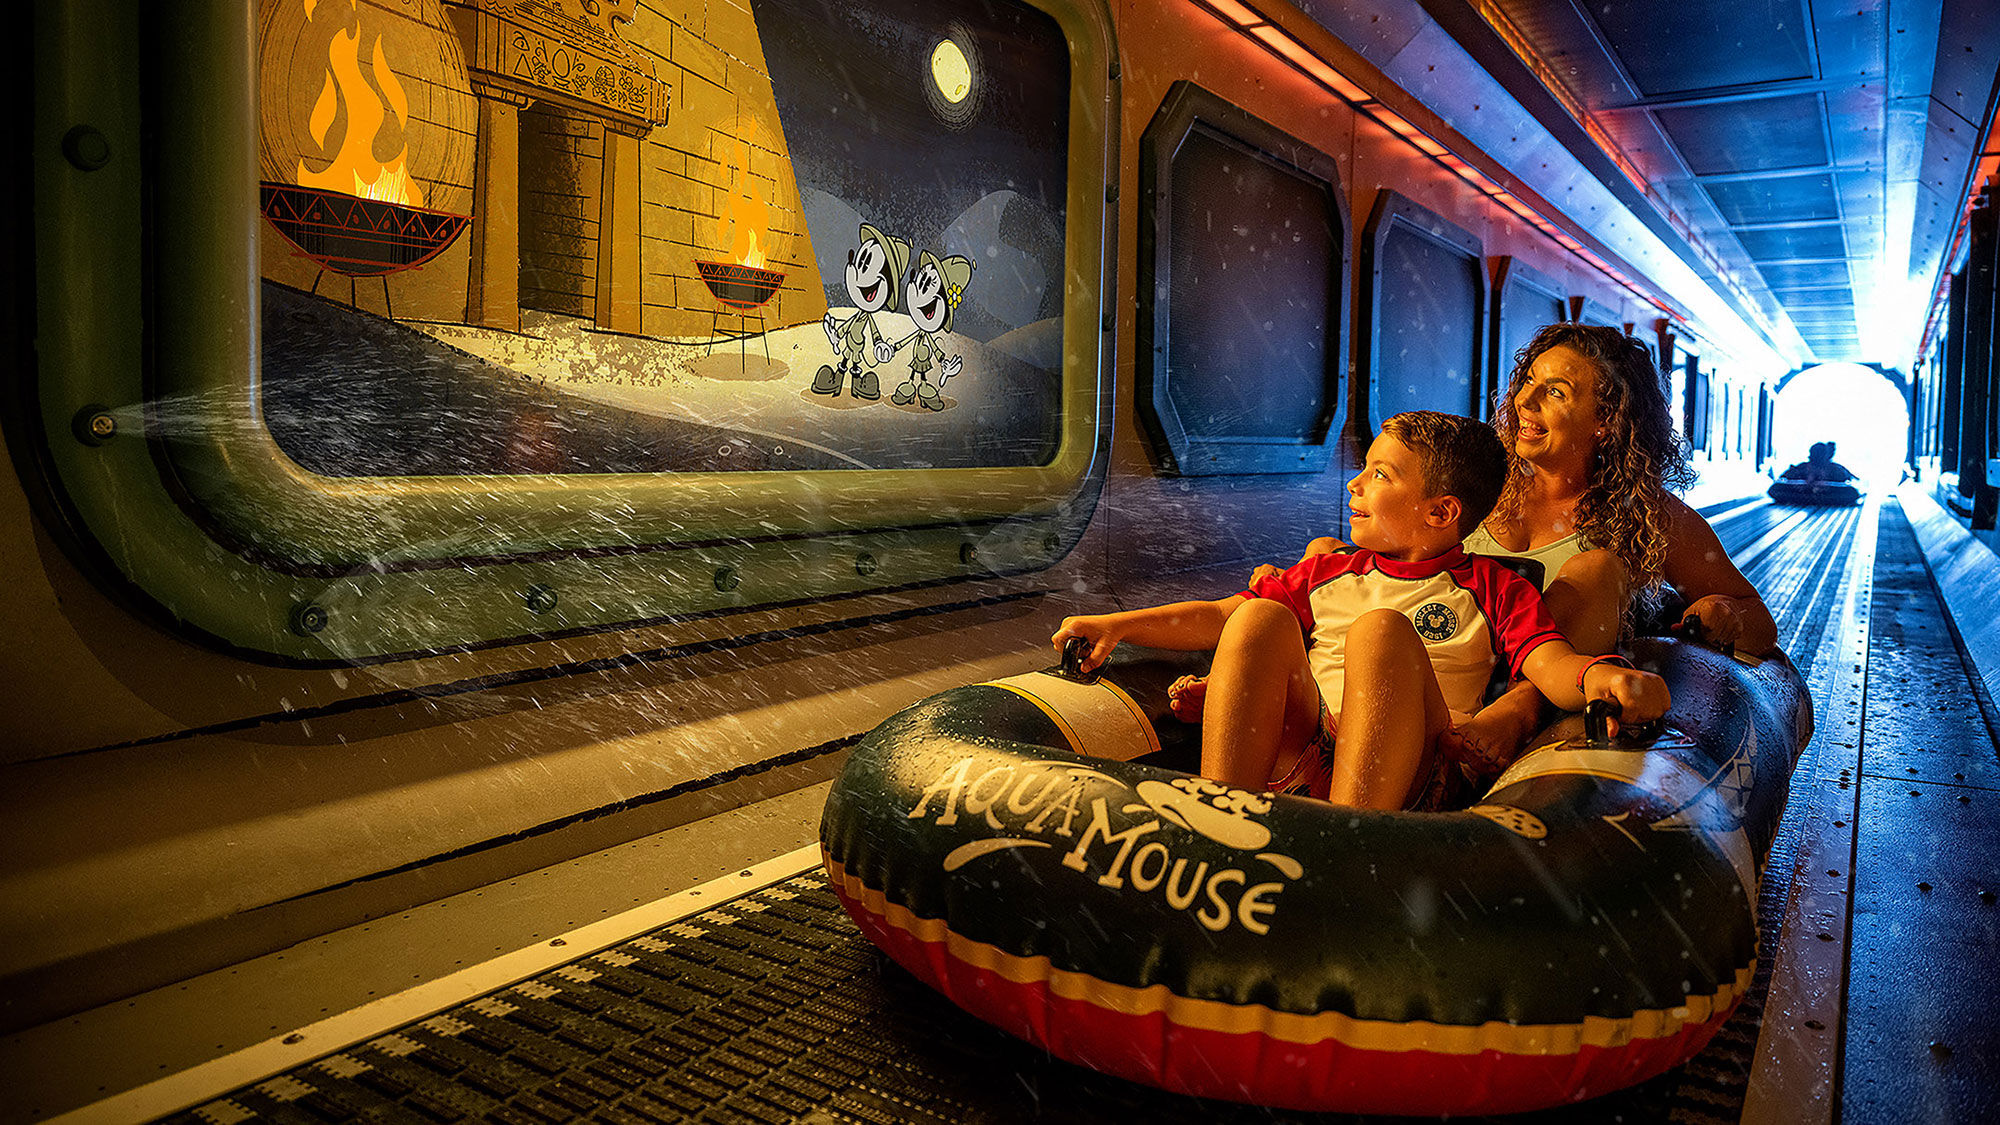 Like the Disney Wish that debuted last year, the Treasure will include the AquaMouse two-person water coaster ride.